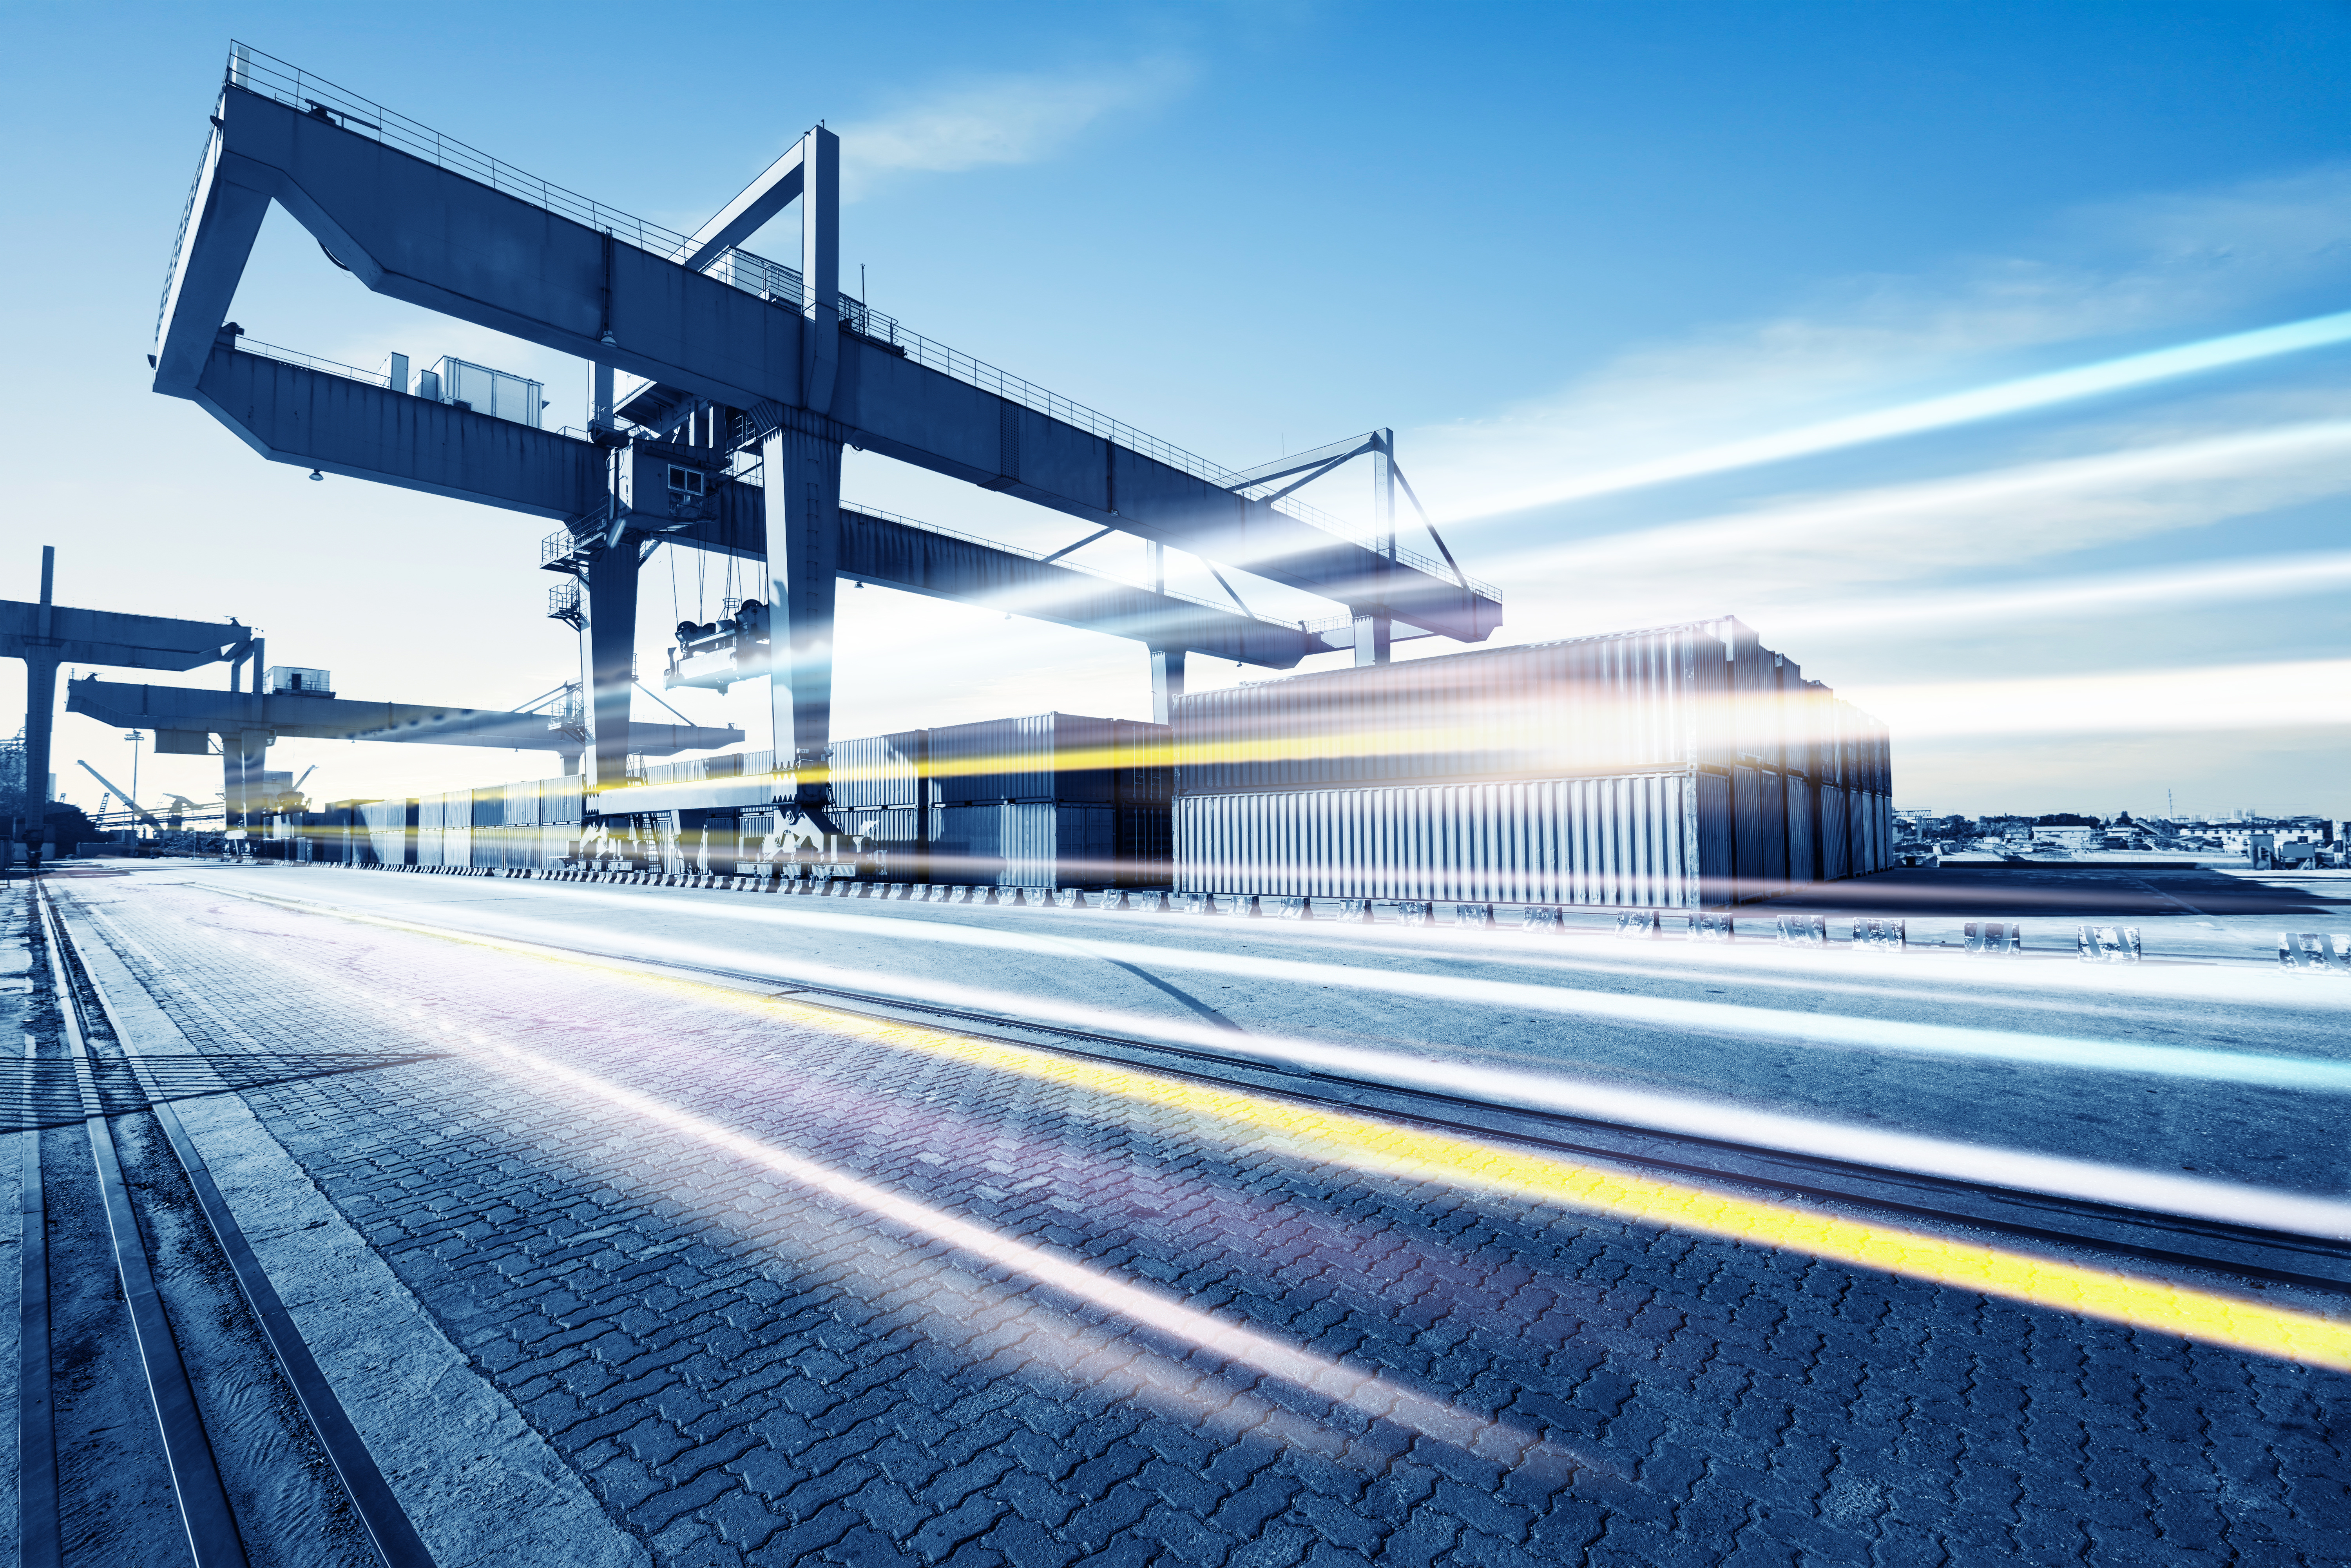 INTERMODAL NEWS & UPDATES IMPACTING YOUR BUSINESS TODAY - Sept 17, 2021